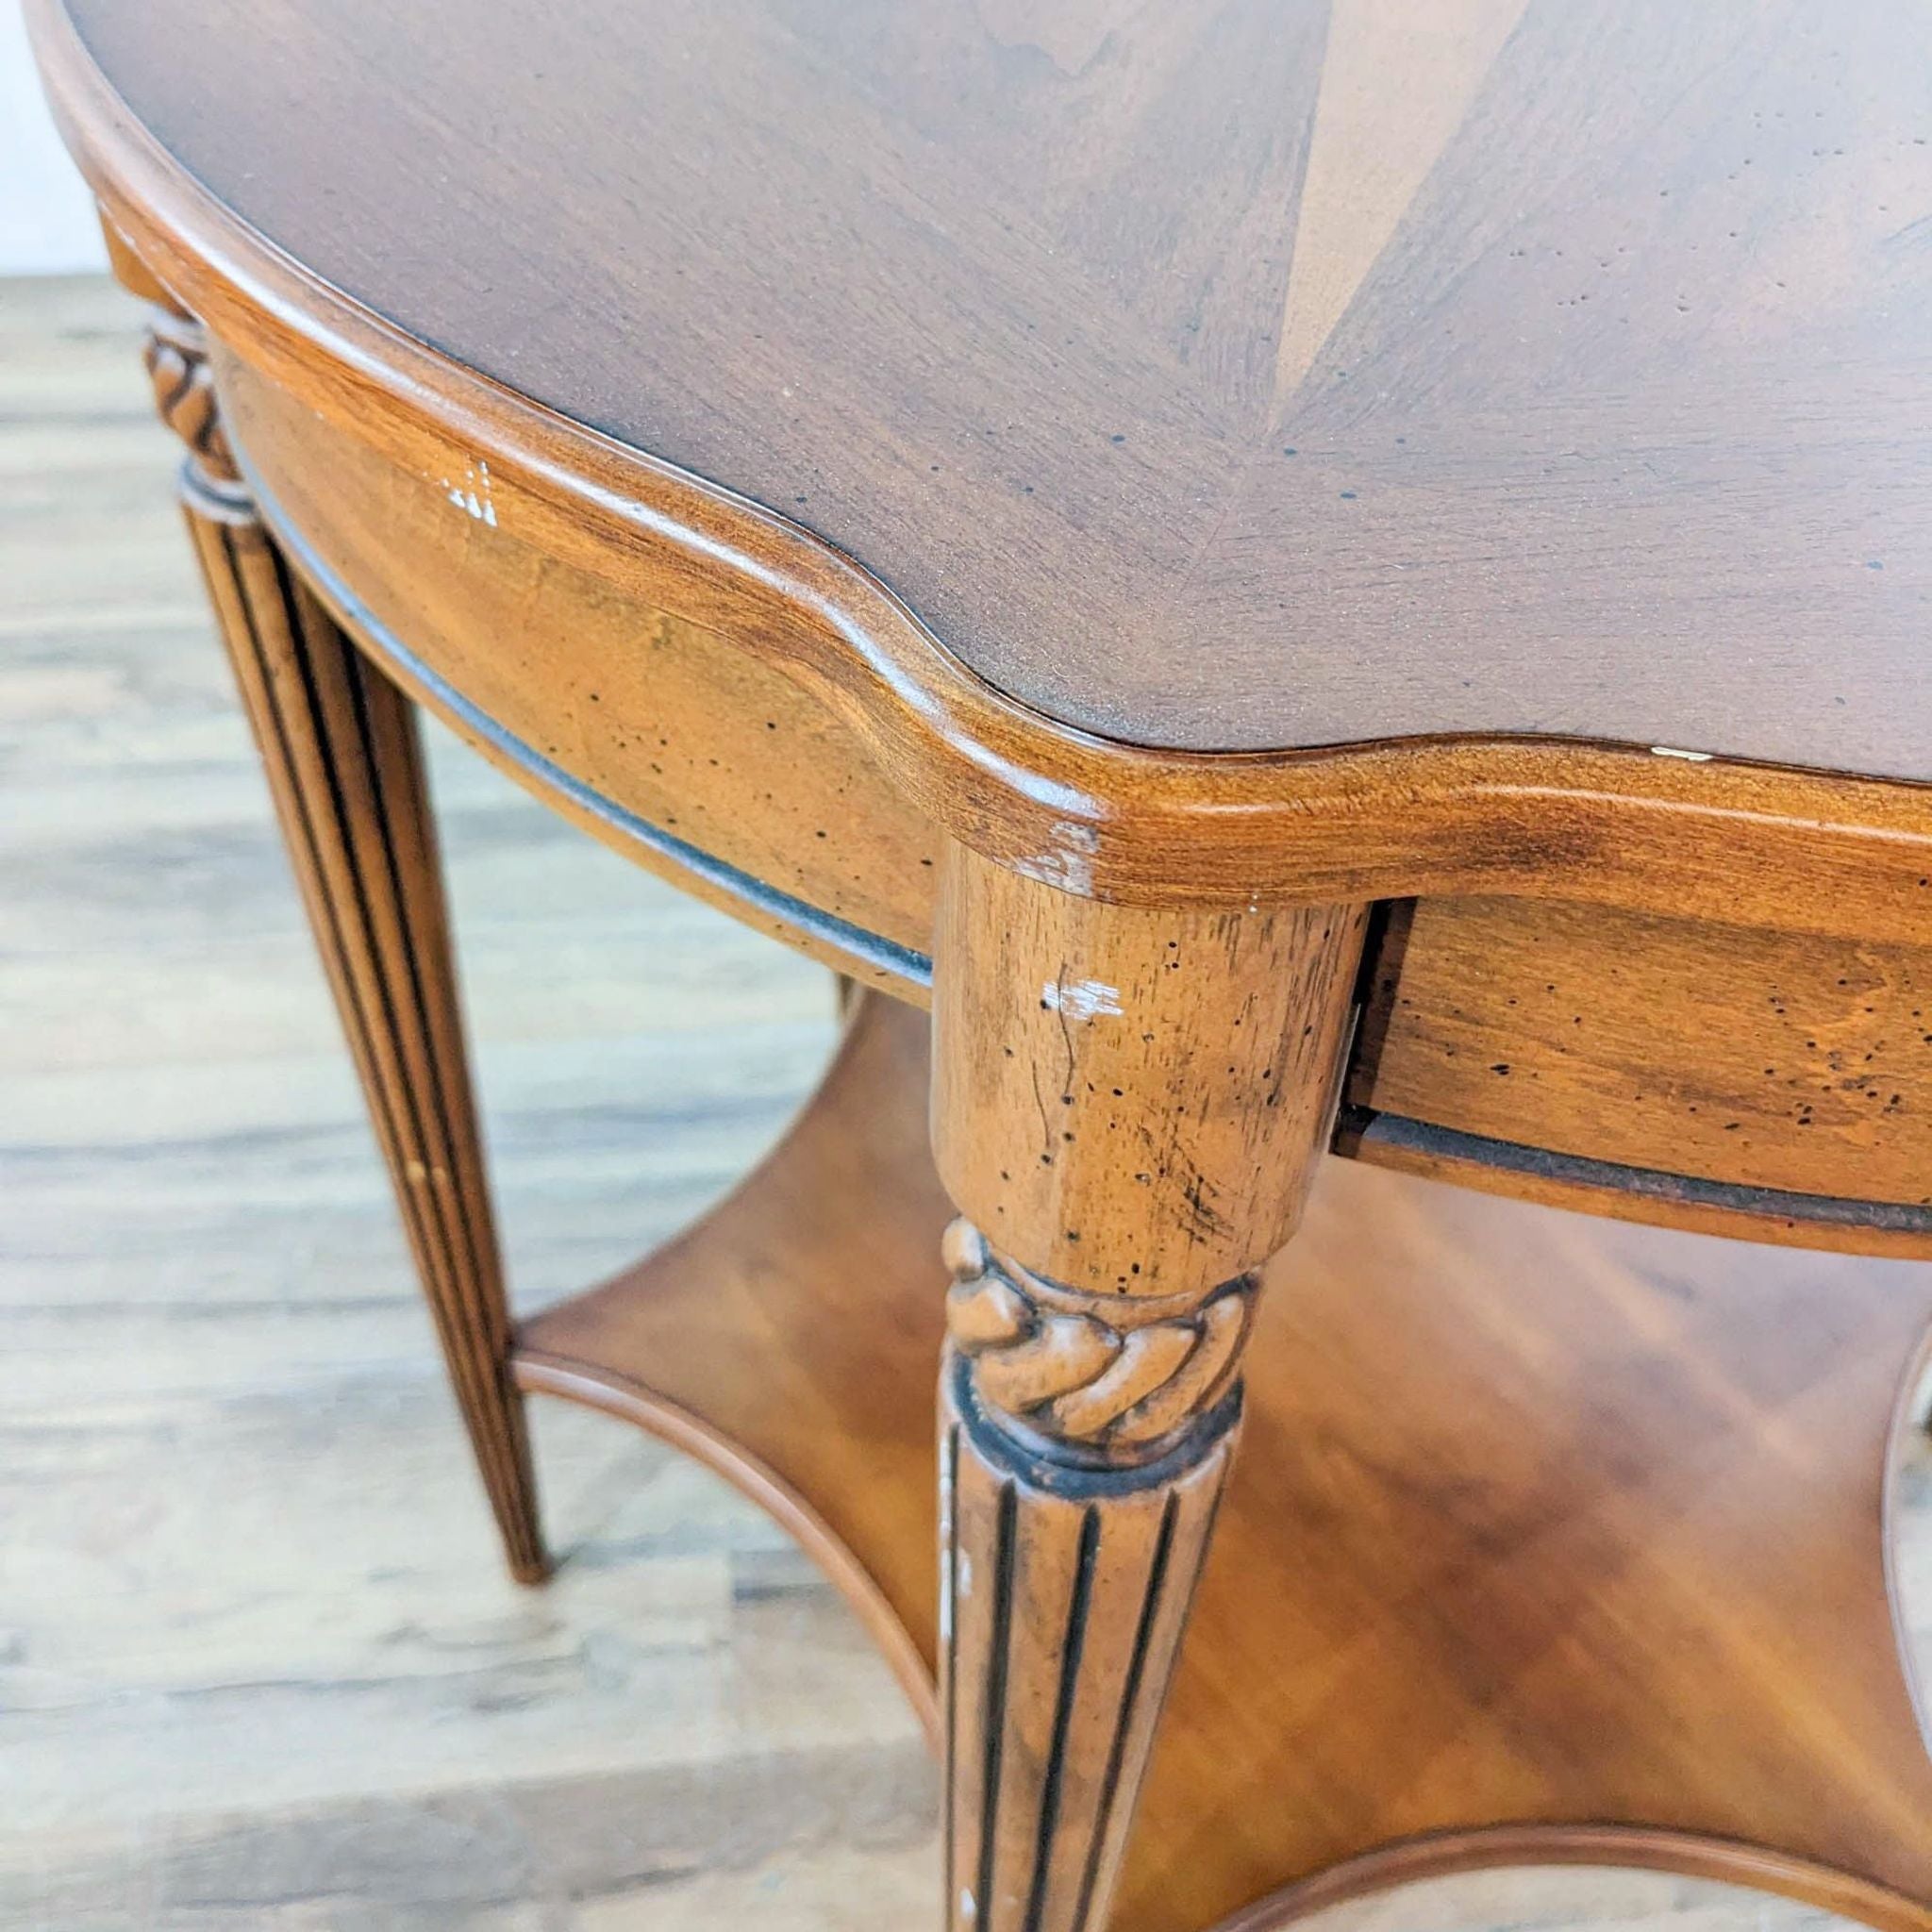 Close-up of Reperch table corner showing star pattern top and detailed leg design.